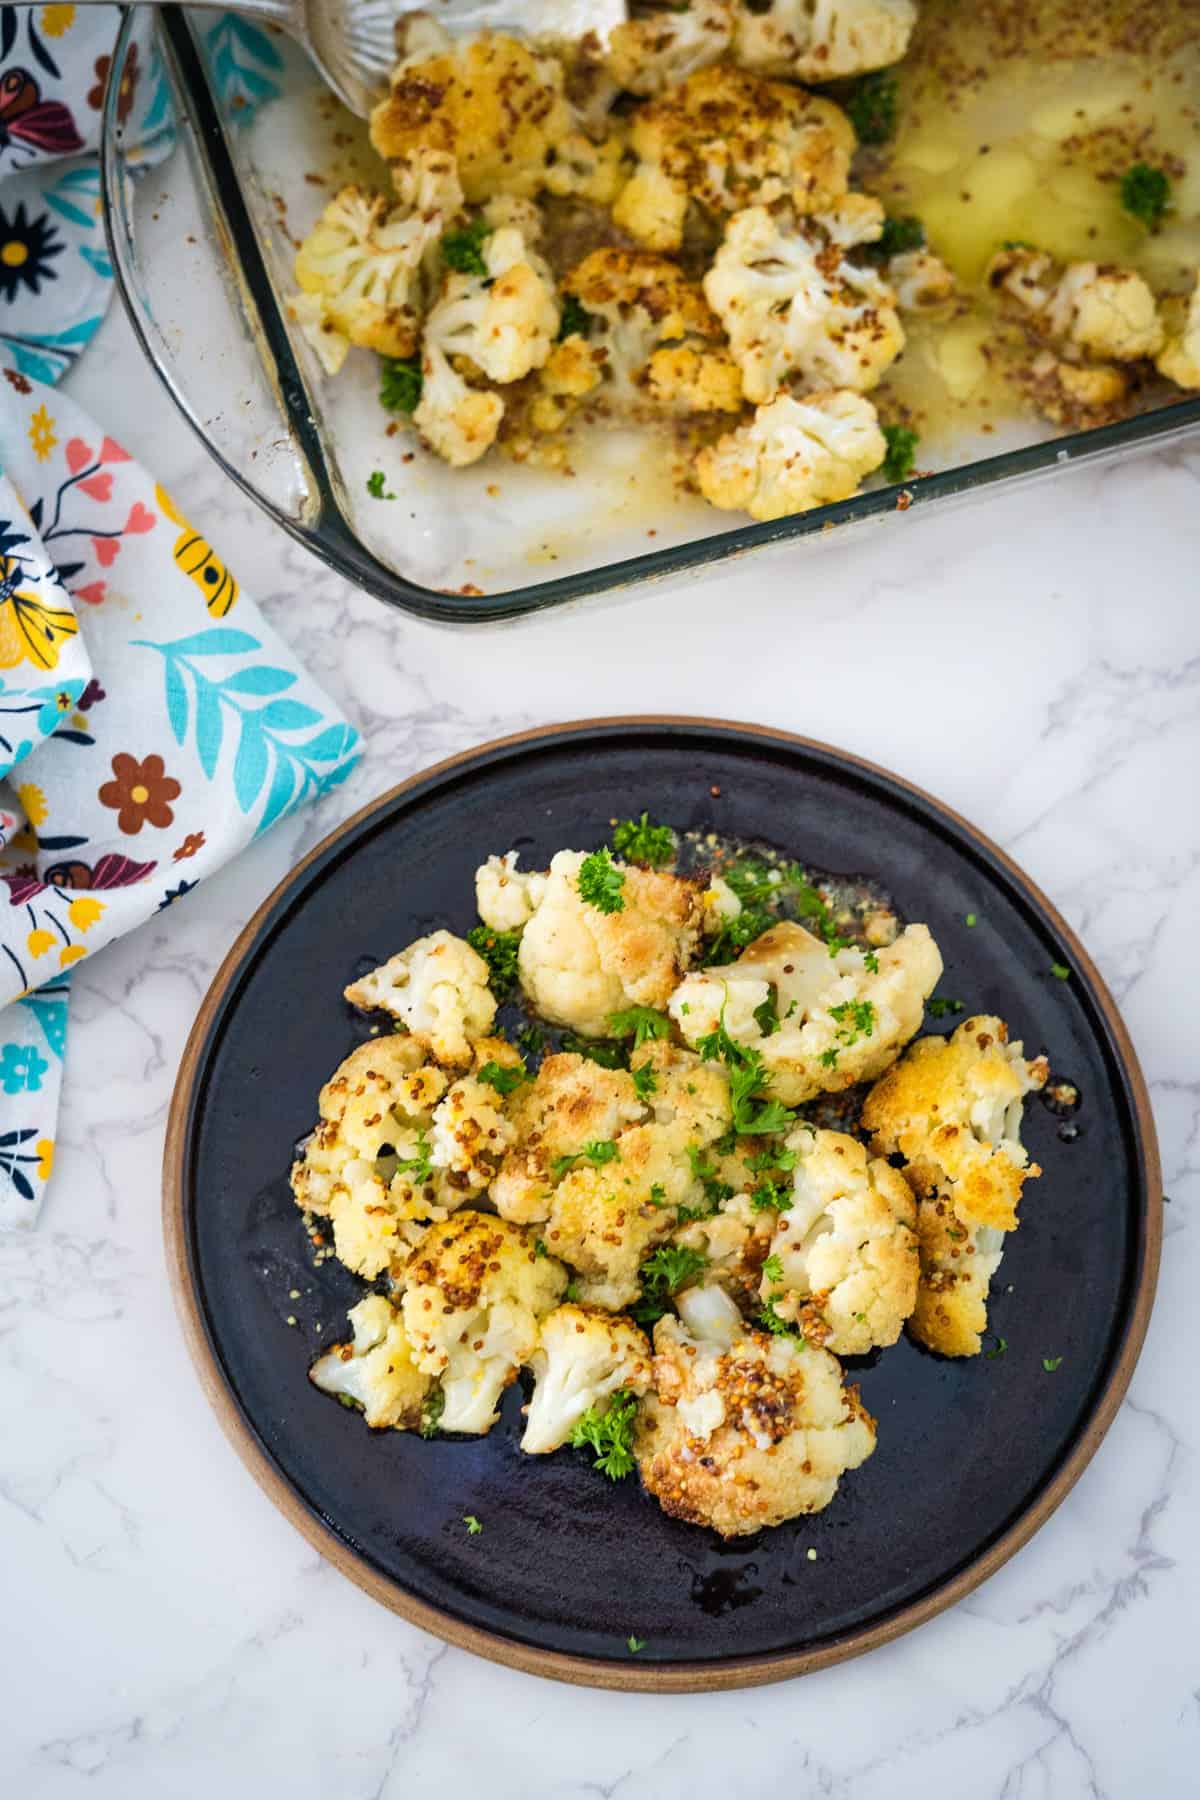 Roasted keto cauliflower on a black plate, garnished with herbs. A baking dish with more cauliflower sits in the background.